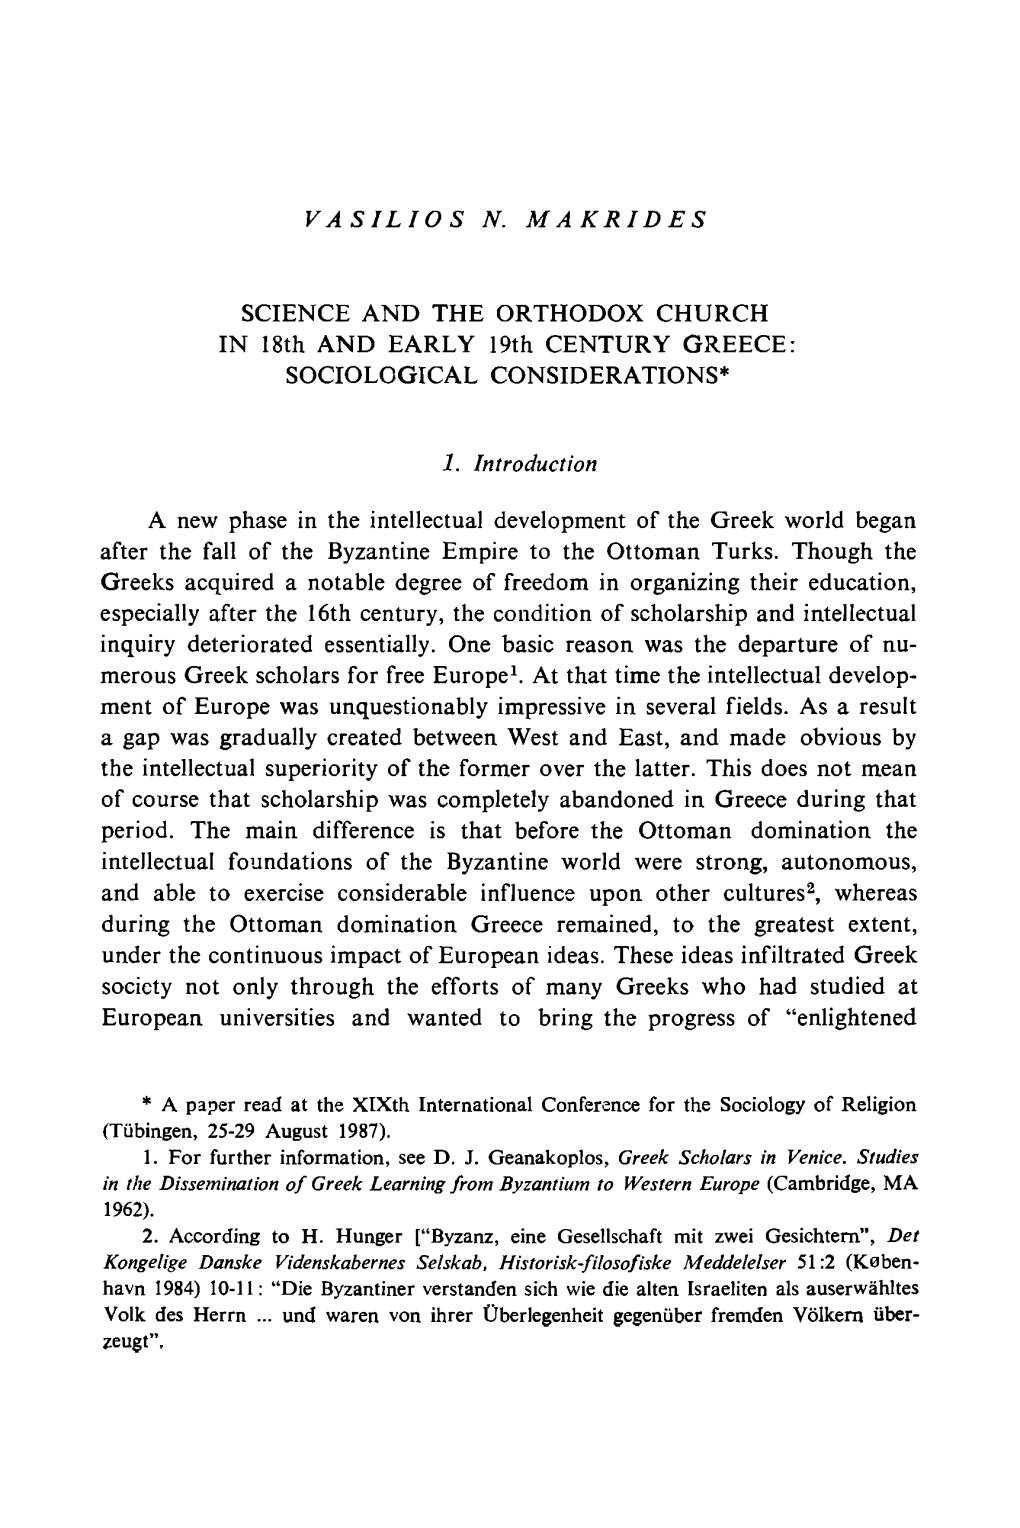 SCIENCE and the ORTHODOX CHURCH in 18Th and EARLY 19Th CENTURY GREECE: SOCIOLOGICAL CONSIDERATIONS* a New Phase in the Intellect